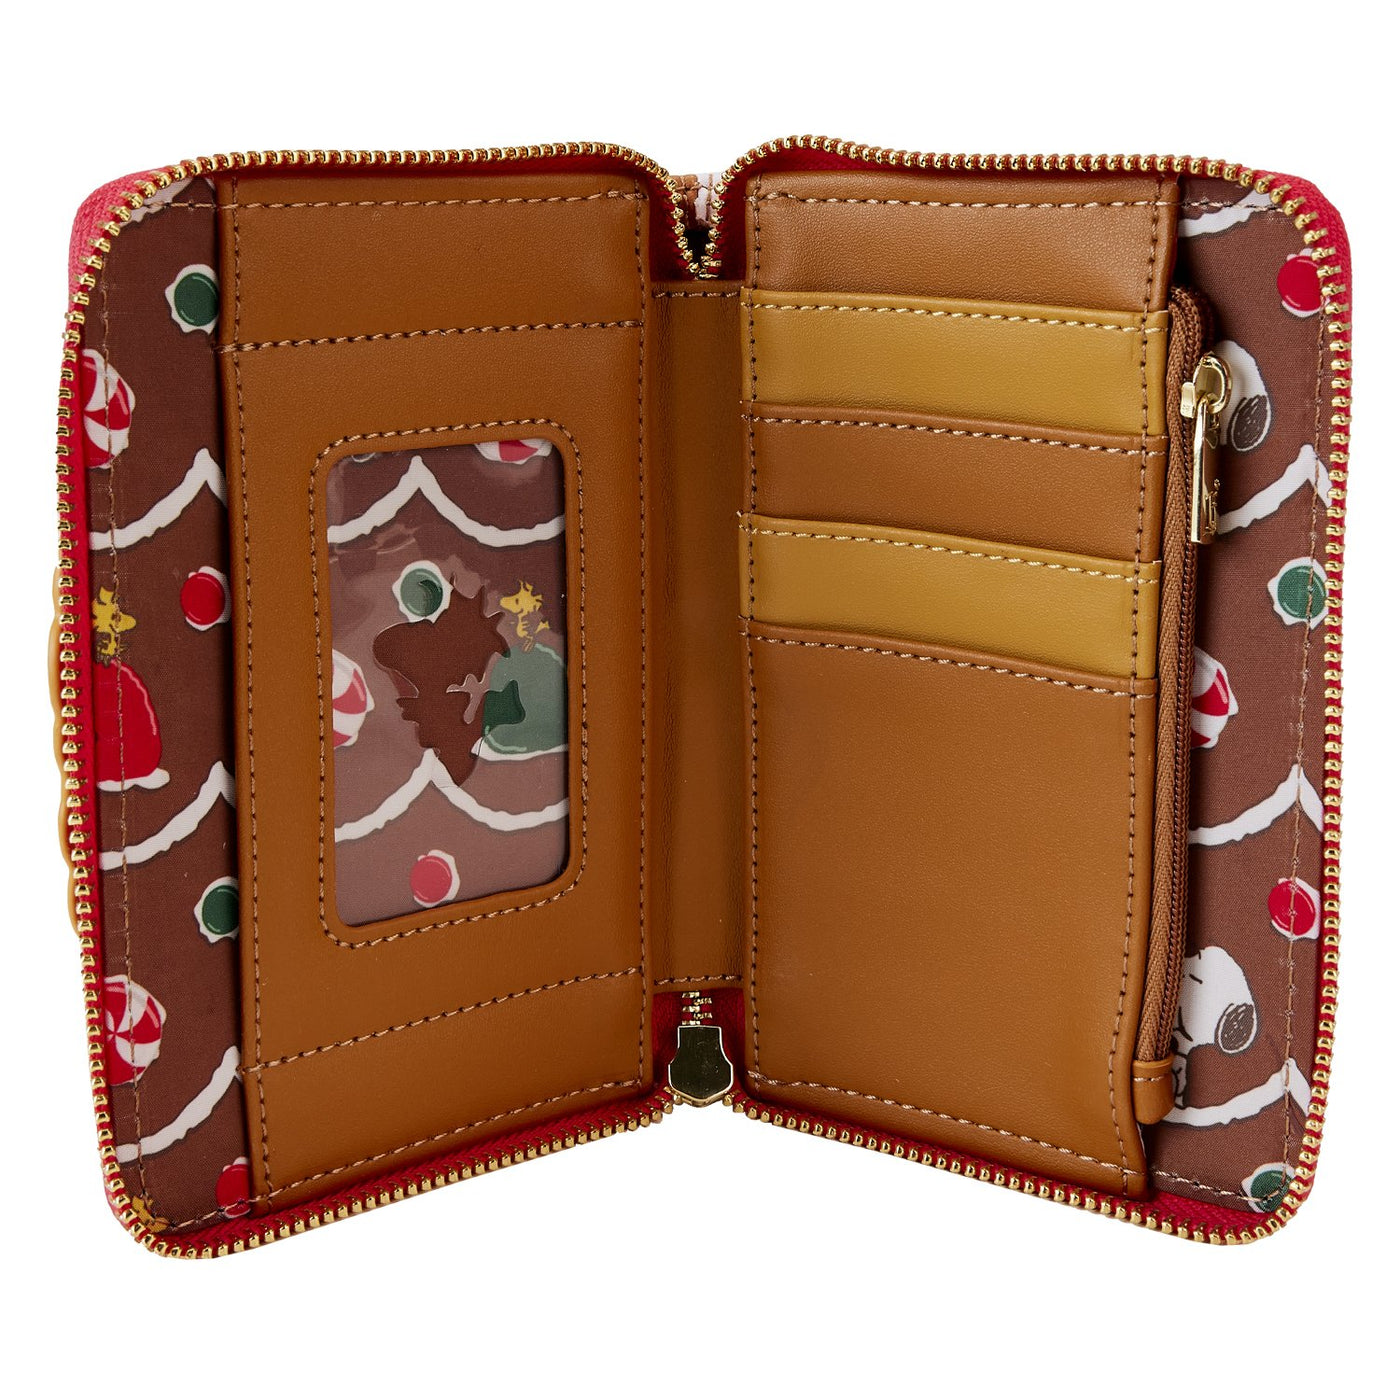 Loungefly Peanuts Snoopy Gingerbread Wreath Zip-Around Wallet - Preorder